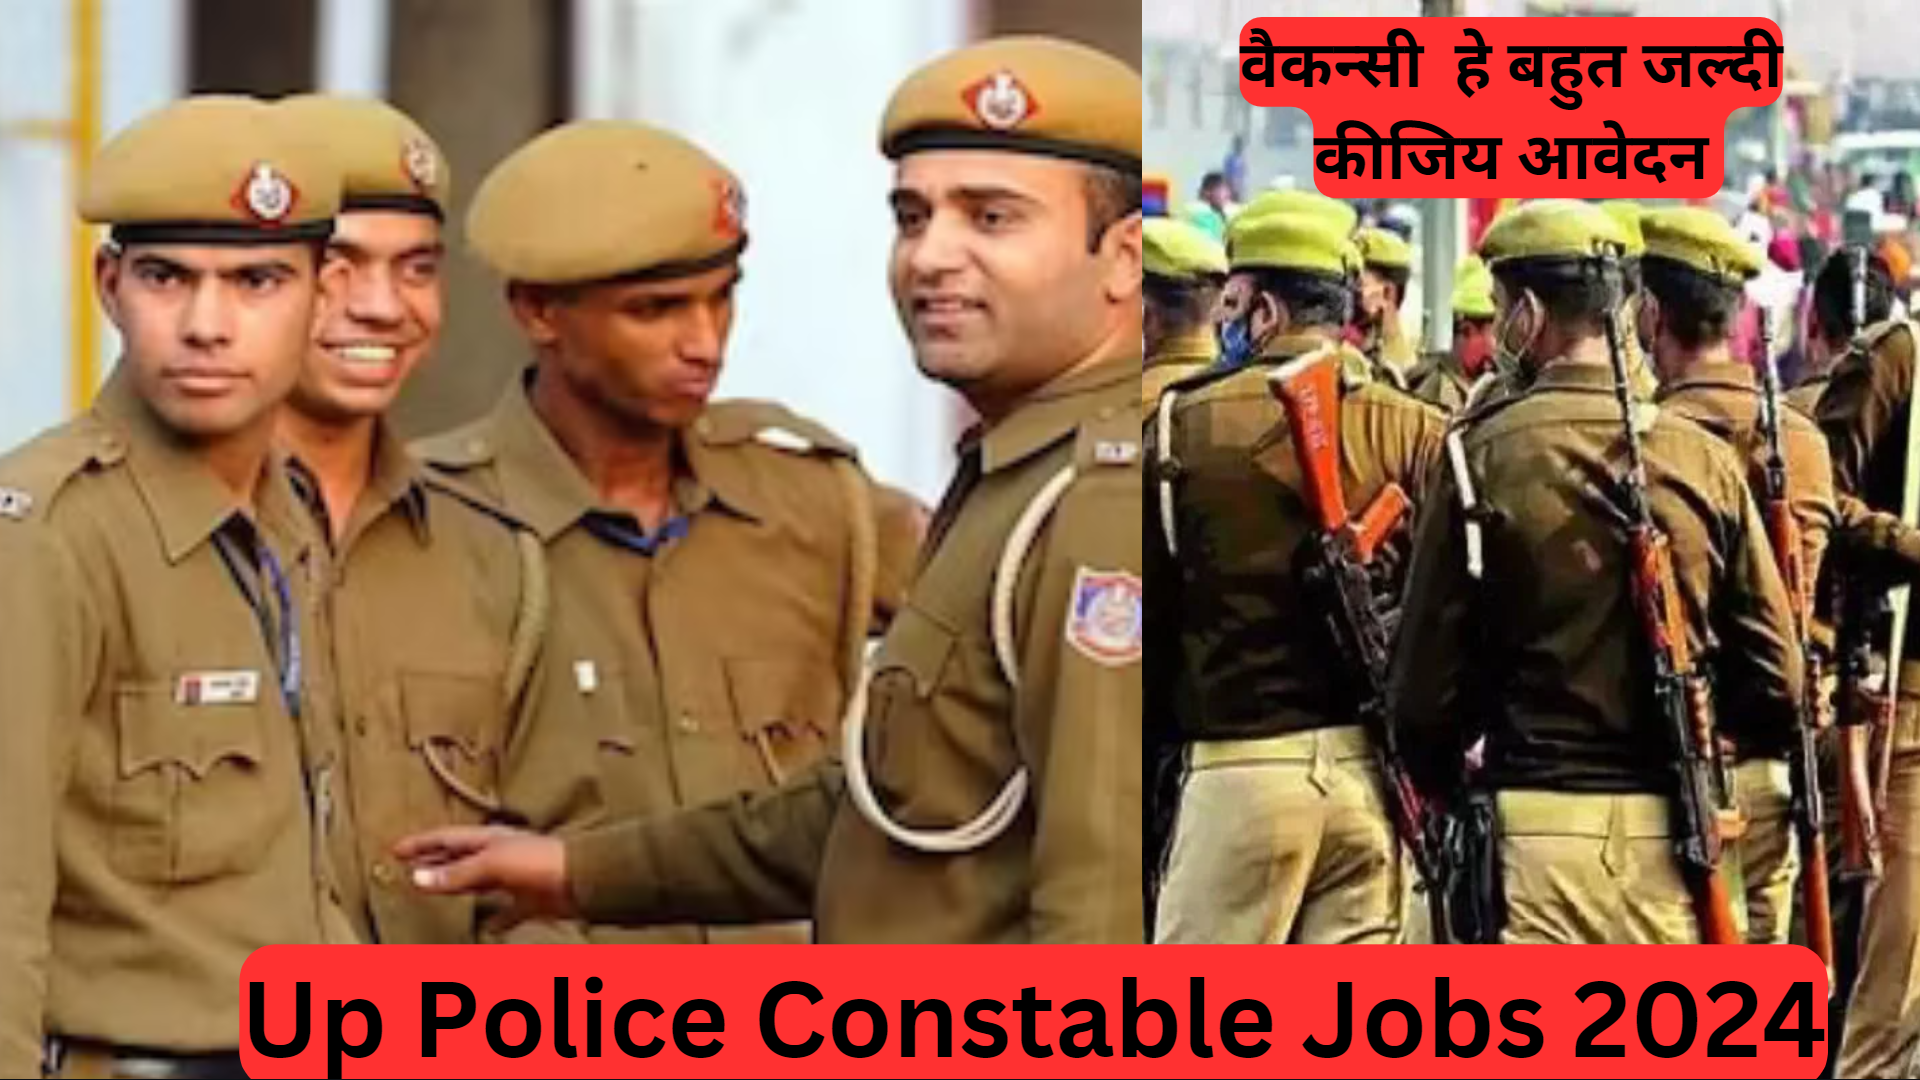 Up Police Constable Jobs 2024